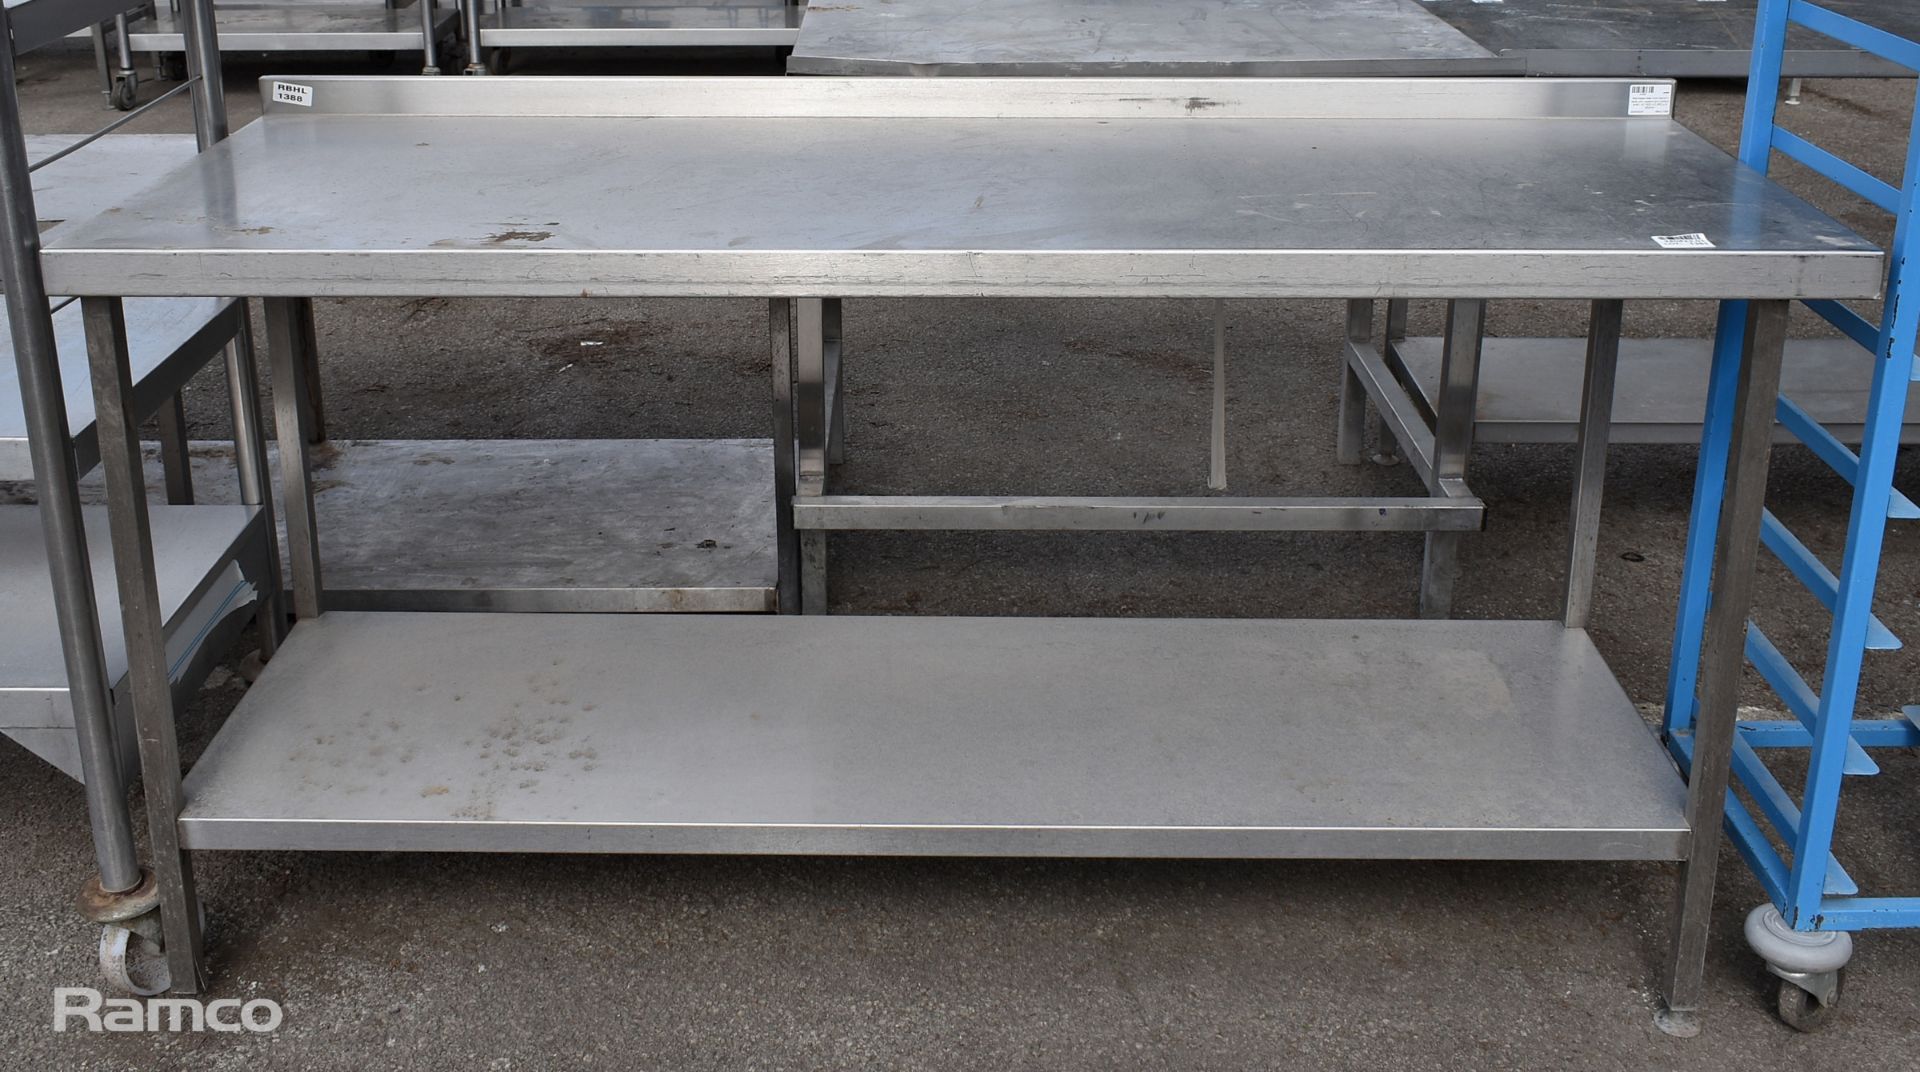 Stainless steel work bench / table with upstand and bottom shelf - W 1800 x D 650 x H 950mm